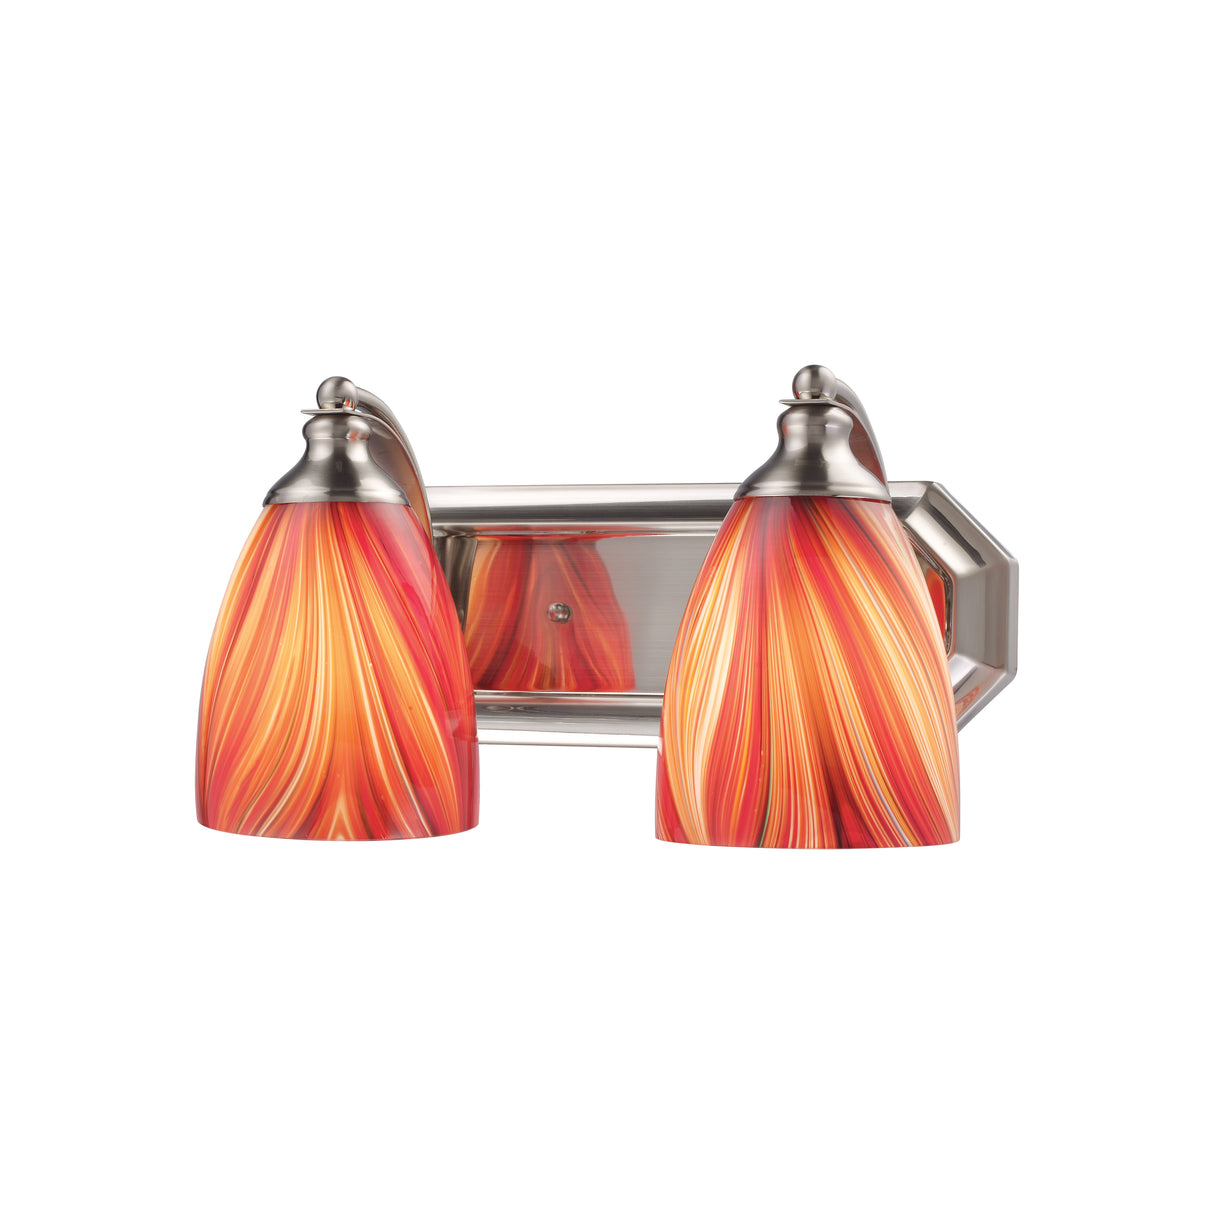 Elk 570-2N-M Mix-N-Match Vanity 2-Light Wall Lamp in Satin Nickel with Multi-colored Glass